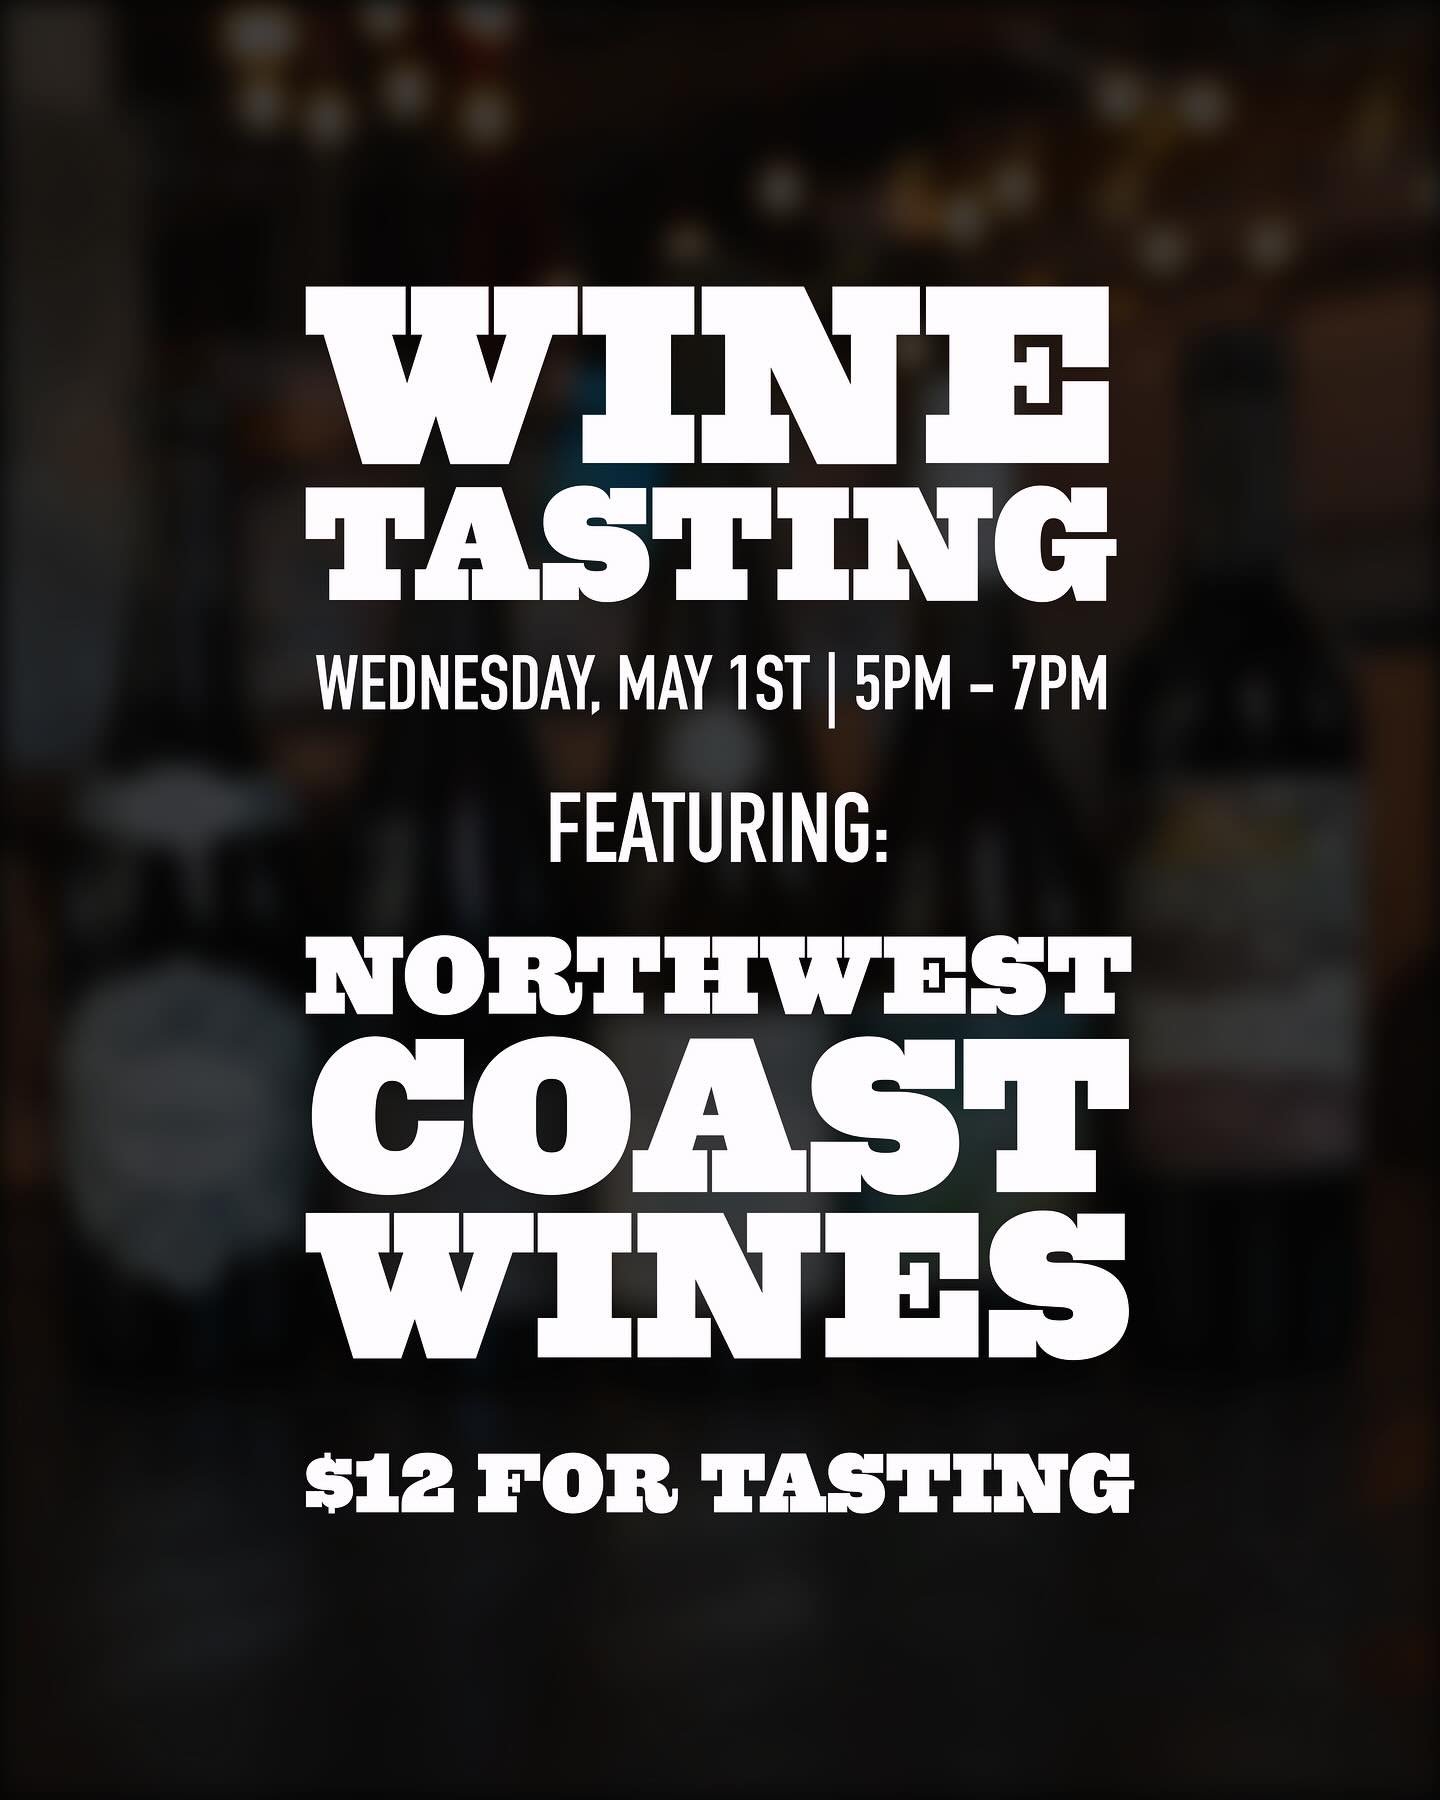 TONIGHT&rsquo;S OUR MONTHLY WINE TASTING 🍇

Come experience a taste of the Northwest Coast! Every first Wednesday of the month, we host a wine tasting. It&rsquo;s $12 for the pairing, which includes 5 wine samples this month. Swipe left to see what 